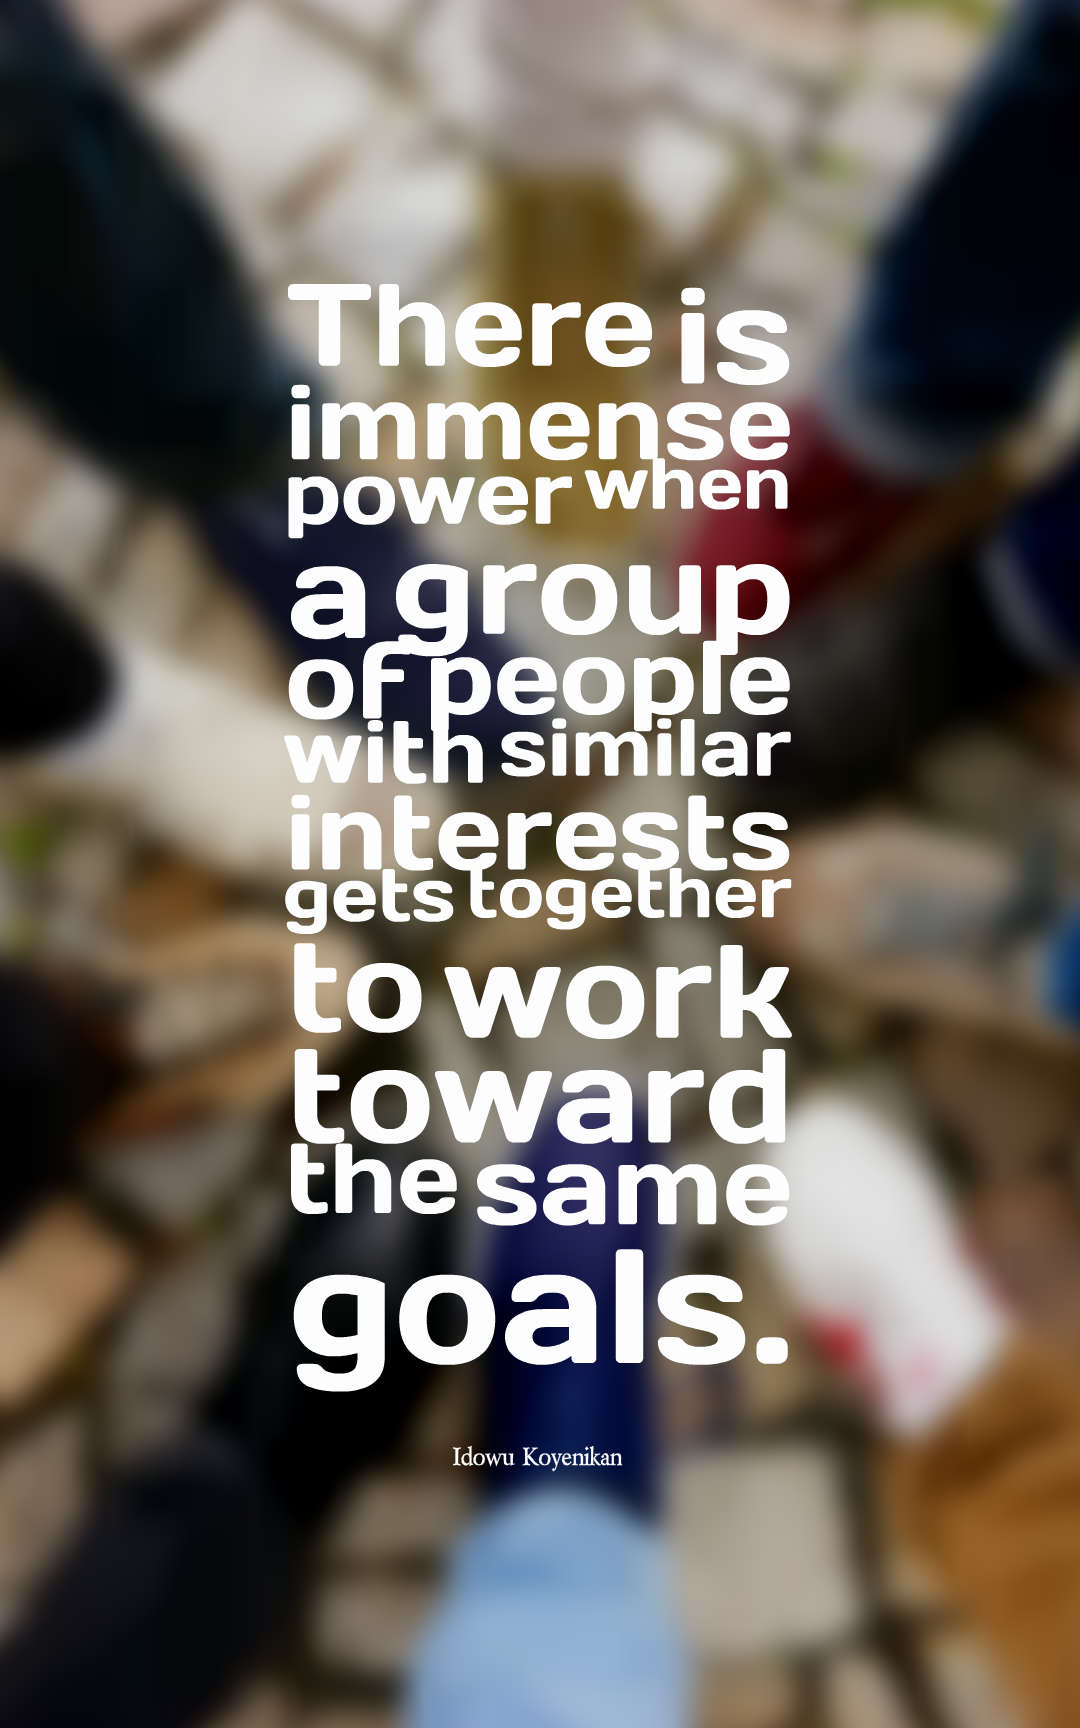 49 Famous Teamwork Quotes And Sayings